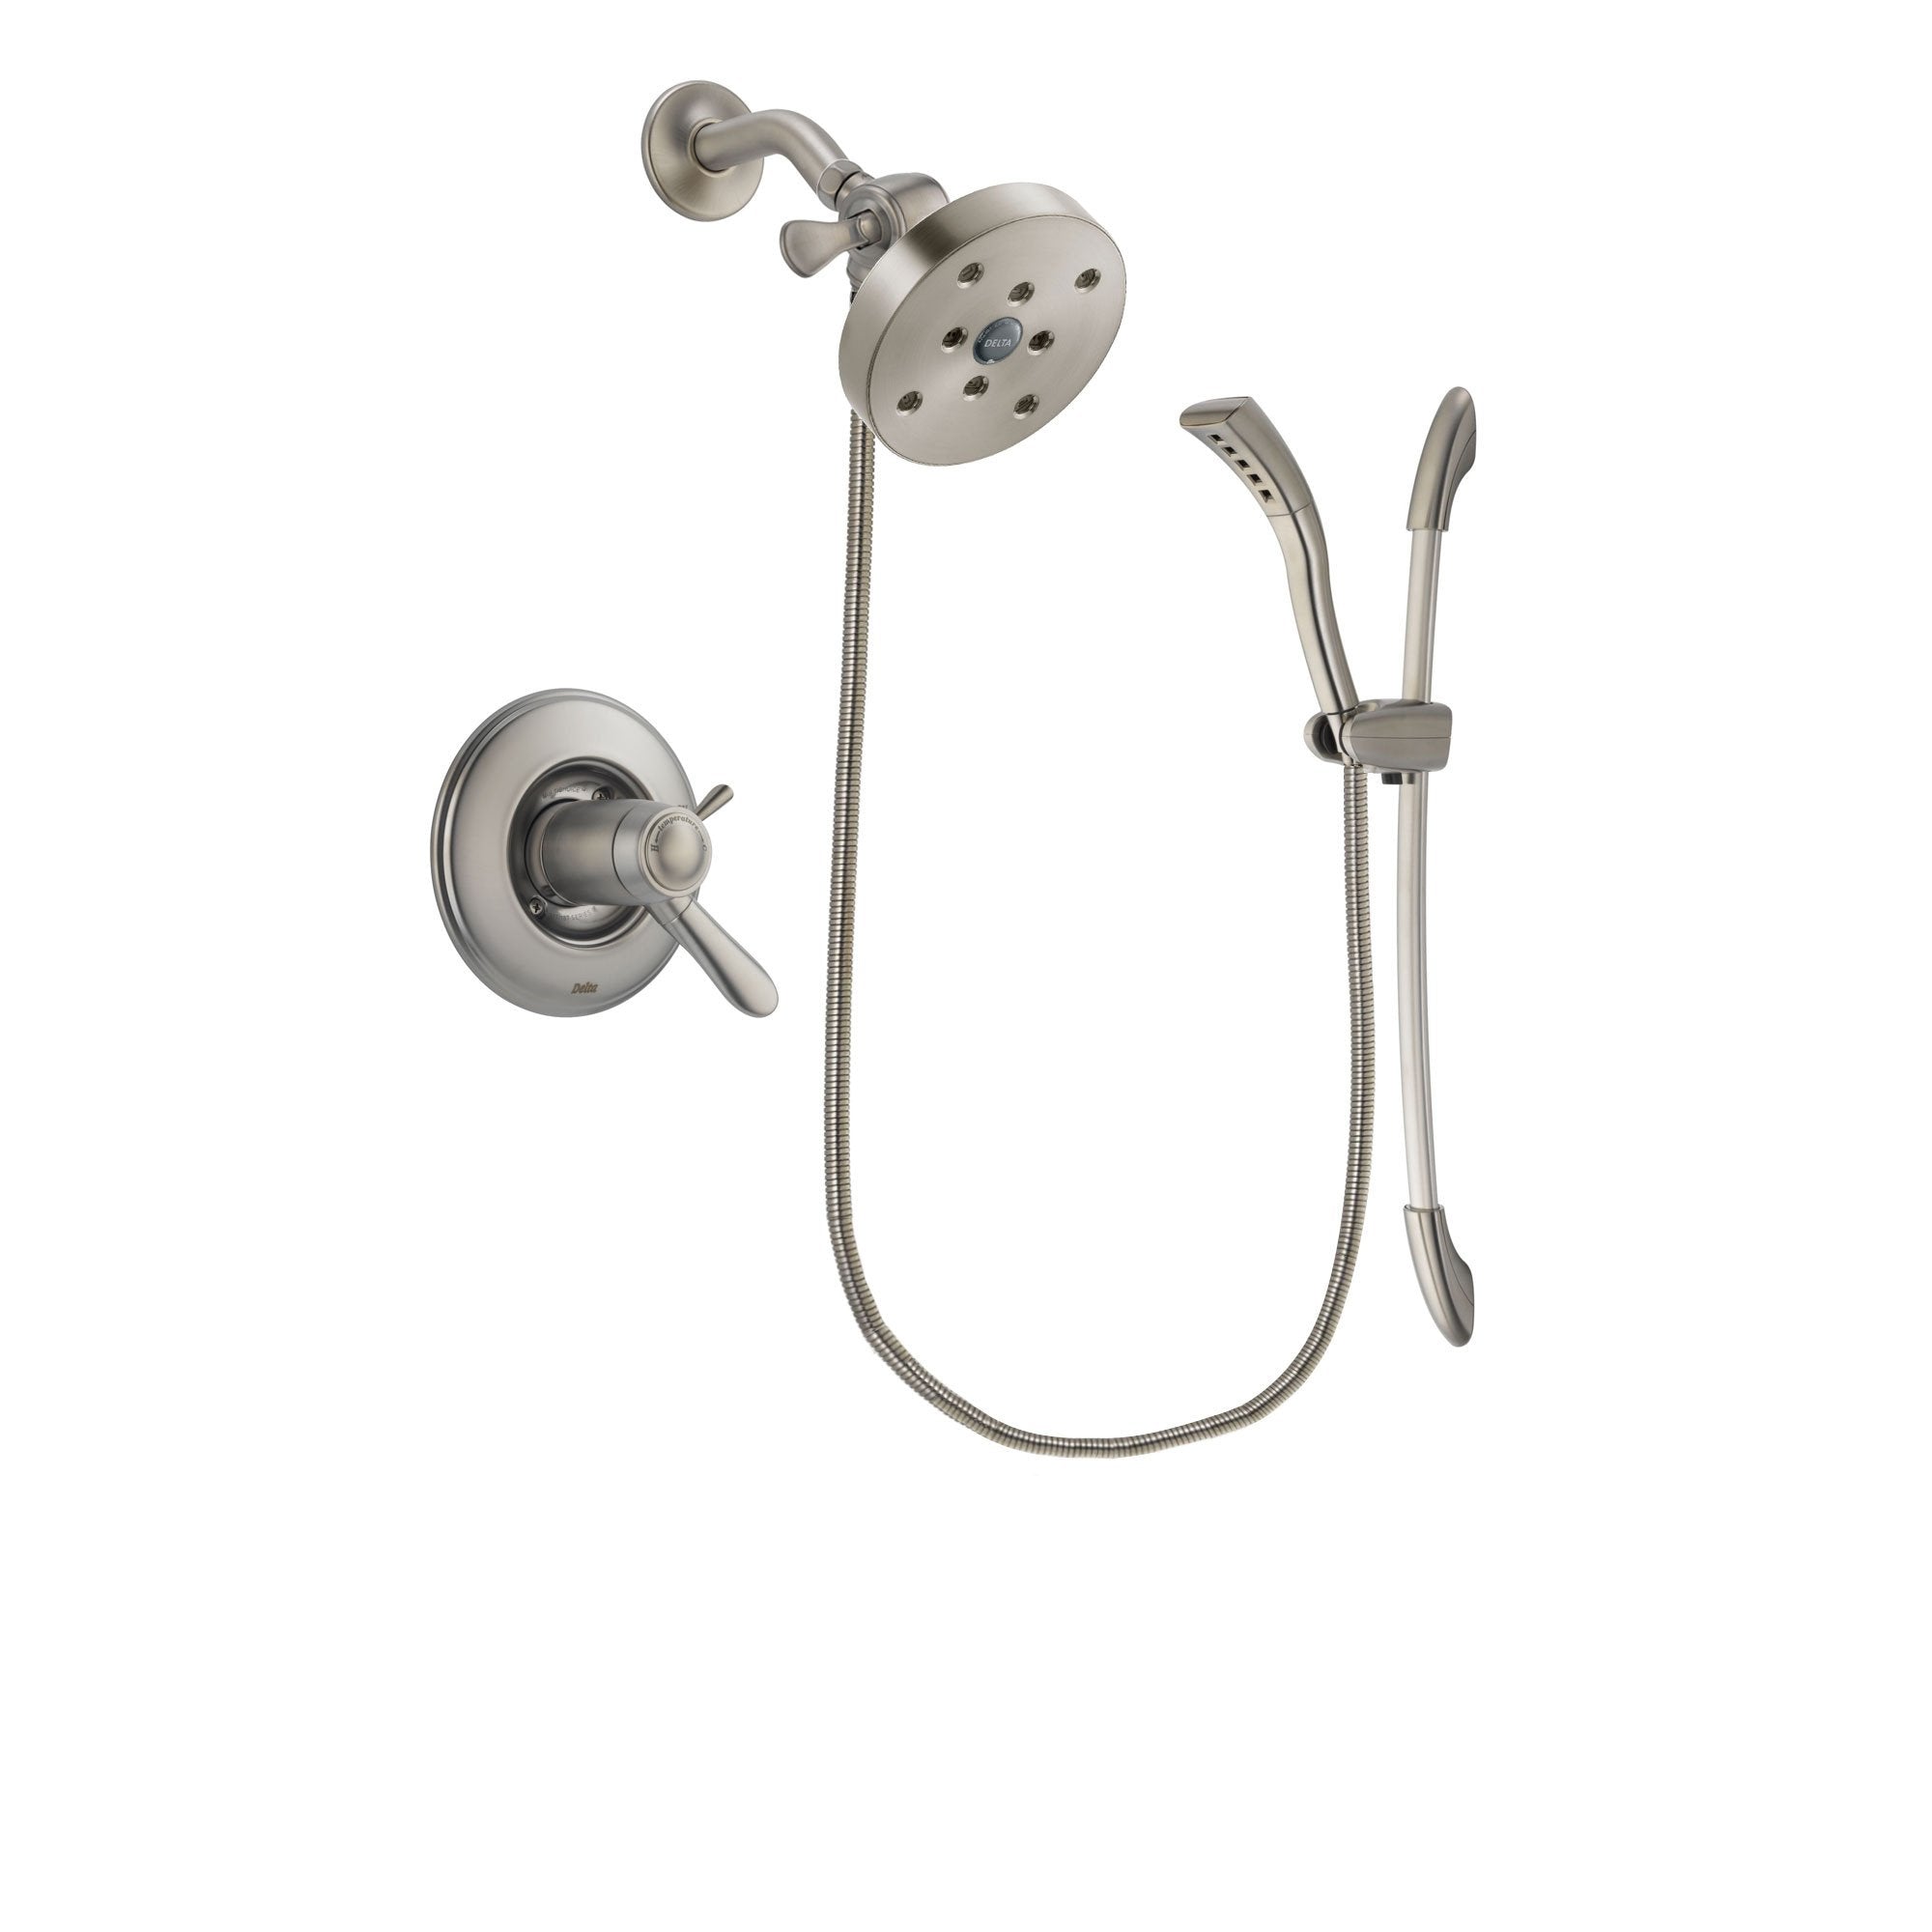 Delta Lahara Stainless Steel Finish Thermostatic Shower Faucet System Package with 5-1/2 inch Shower Head and Handshower with Slide Bar Includes Rough-in Valve DSP1480V